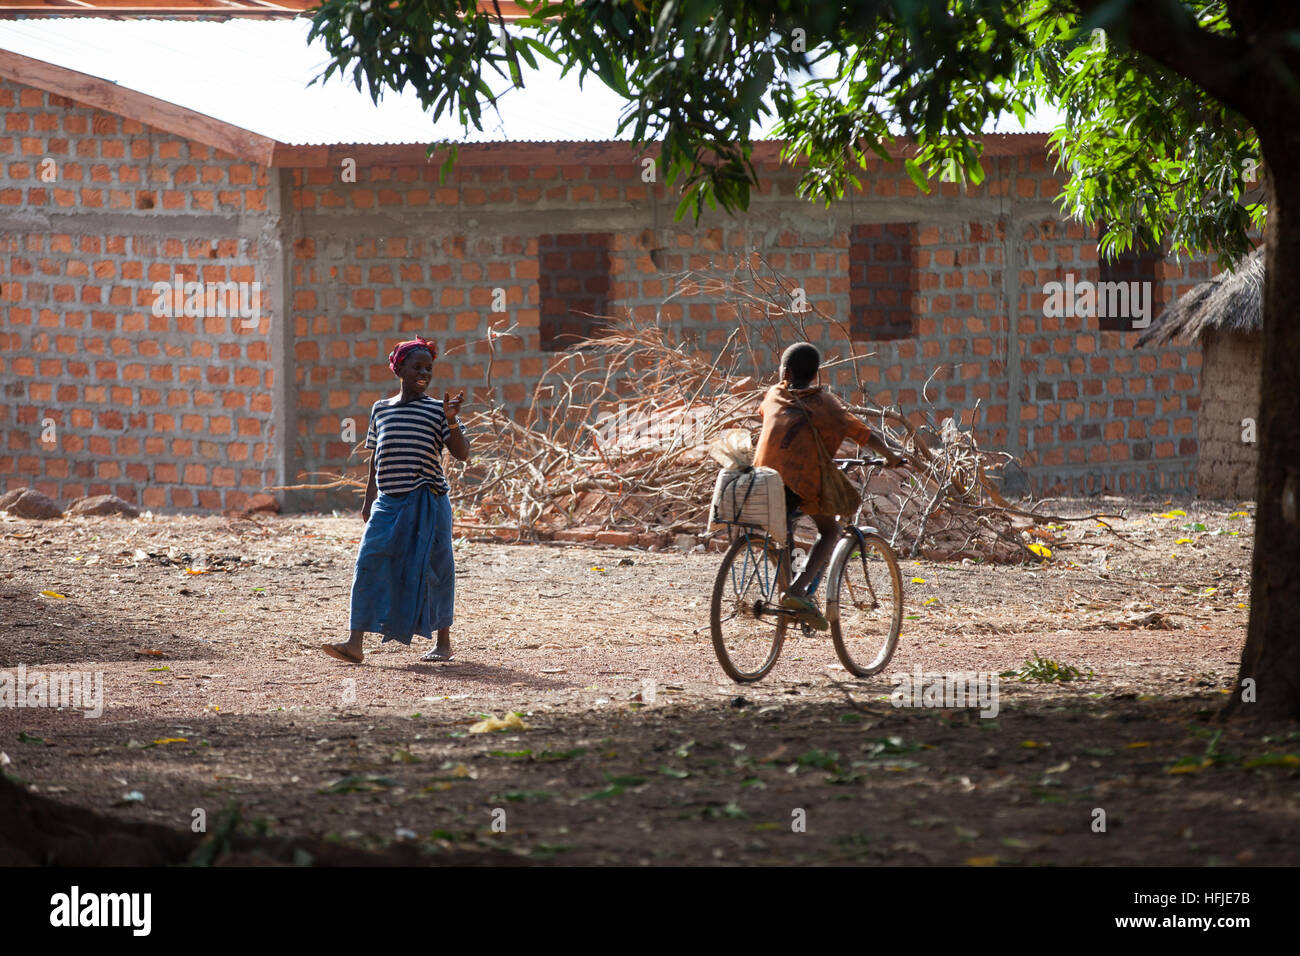 Gbderedou Baranama, Guinea, 2nd May 2015; Daily life - this village and local area will be flooded by the Fomi dam. Stock Photo